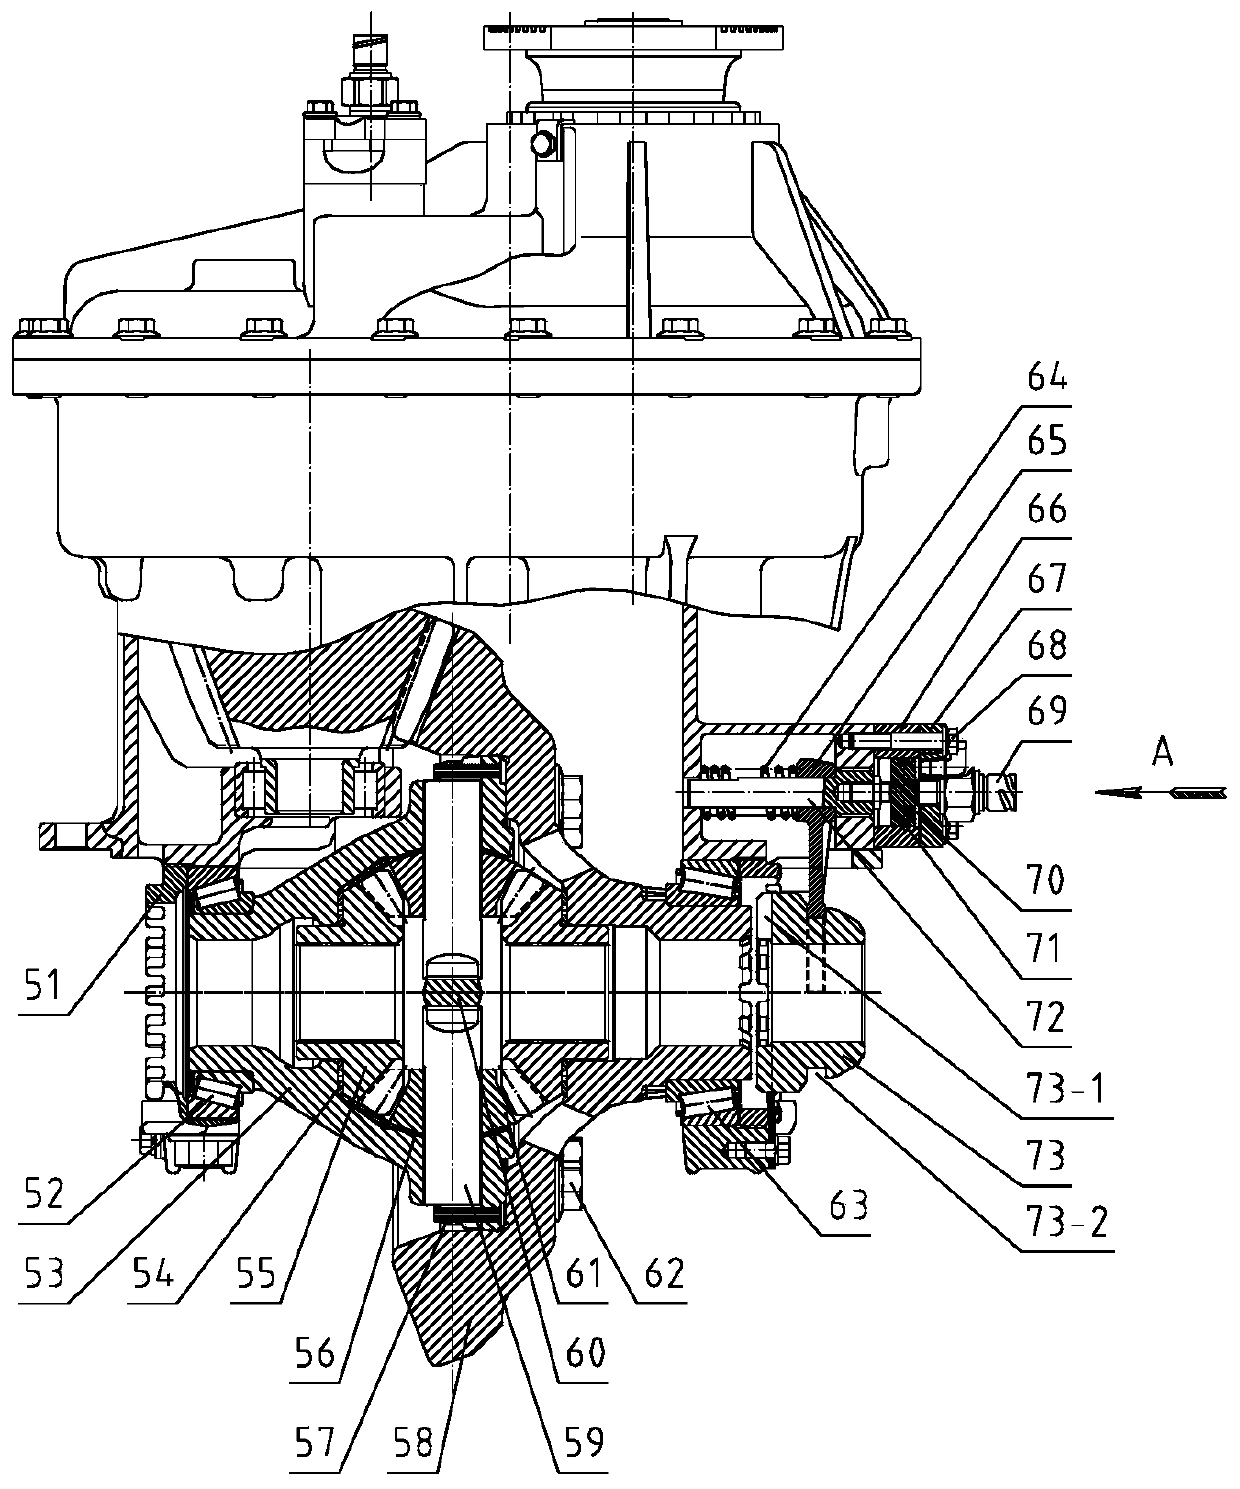 Intermediate axle main reducer assembly provided with rear bevel gear engaging and disengaging mechanism